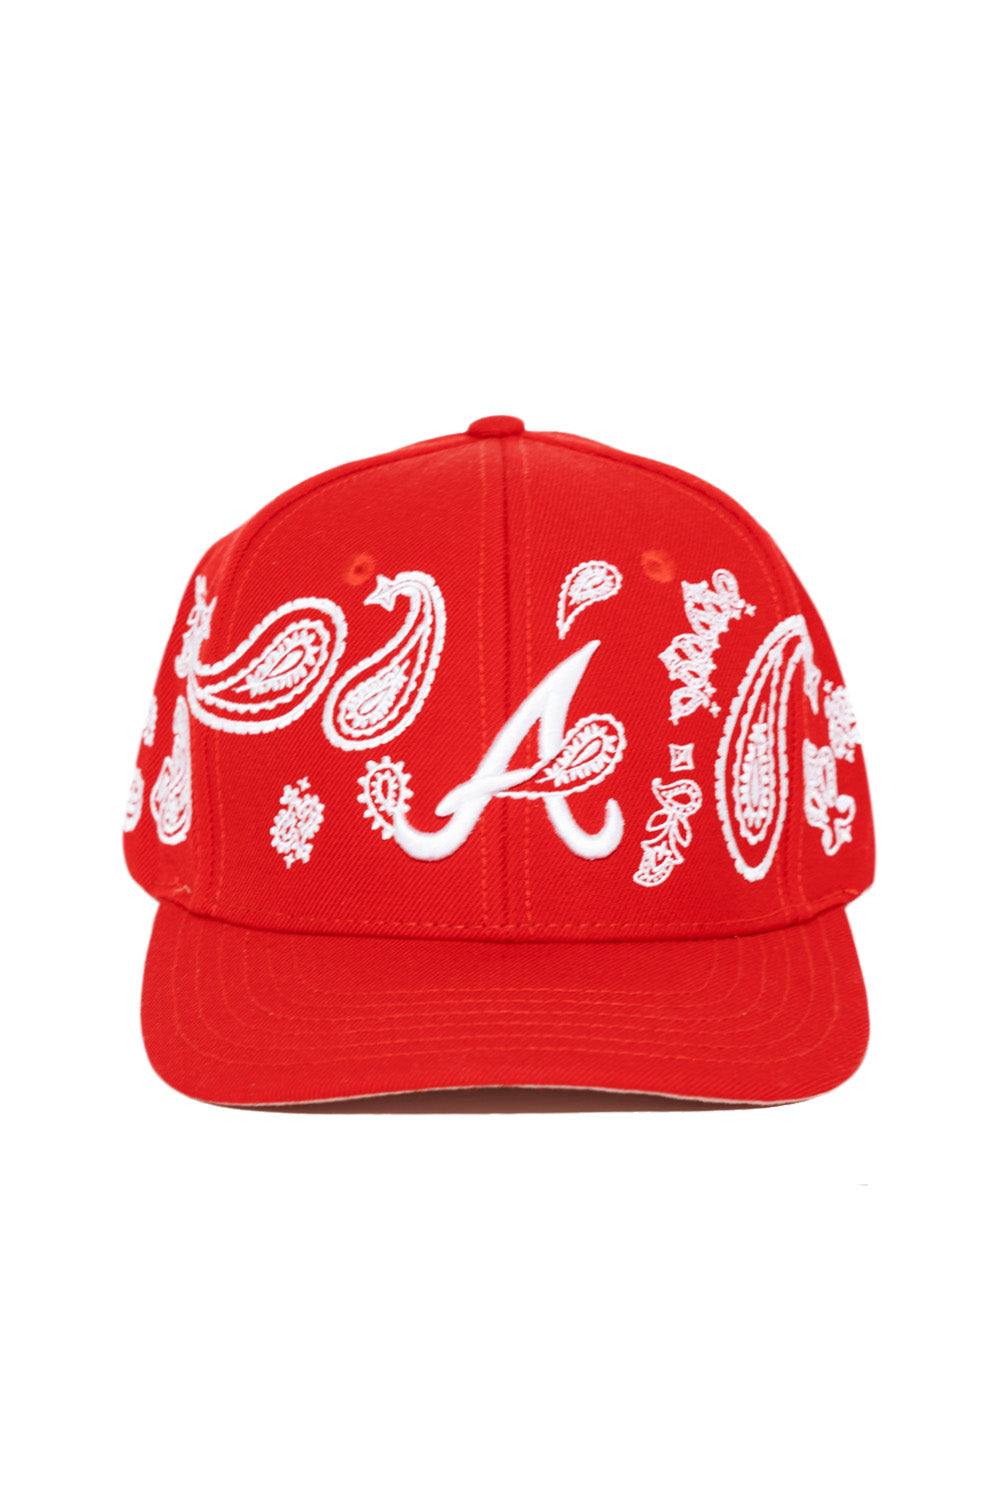 PAISLEY CITY TOUR FITTED (RED ATLANTA)